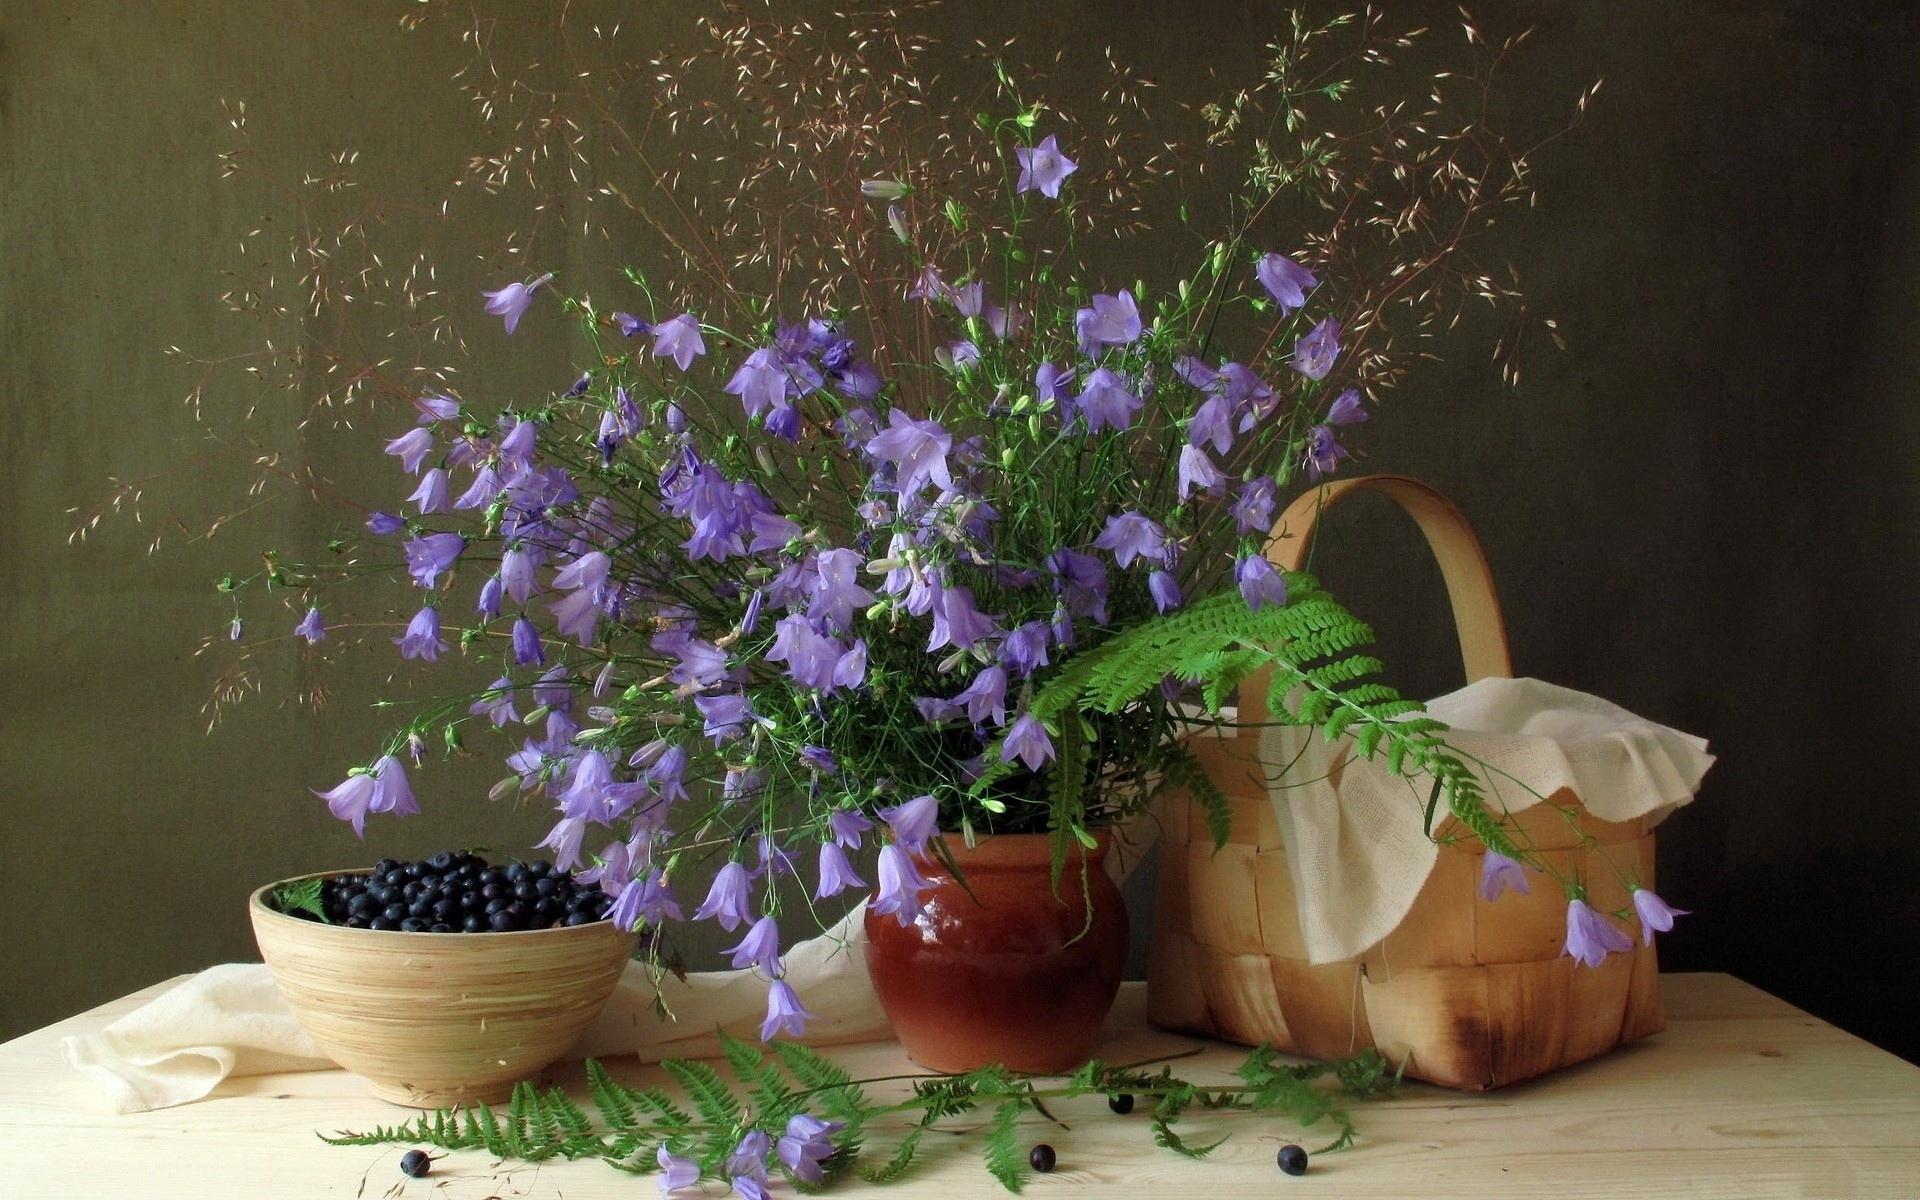 Hd Blueberries Life Flowers Pot Vase Food Rustic Pictures - Free Wallpapers Flower Pot - HD Wallpaper 